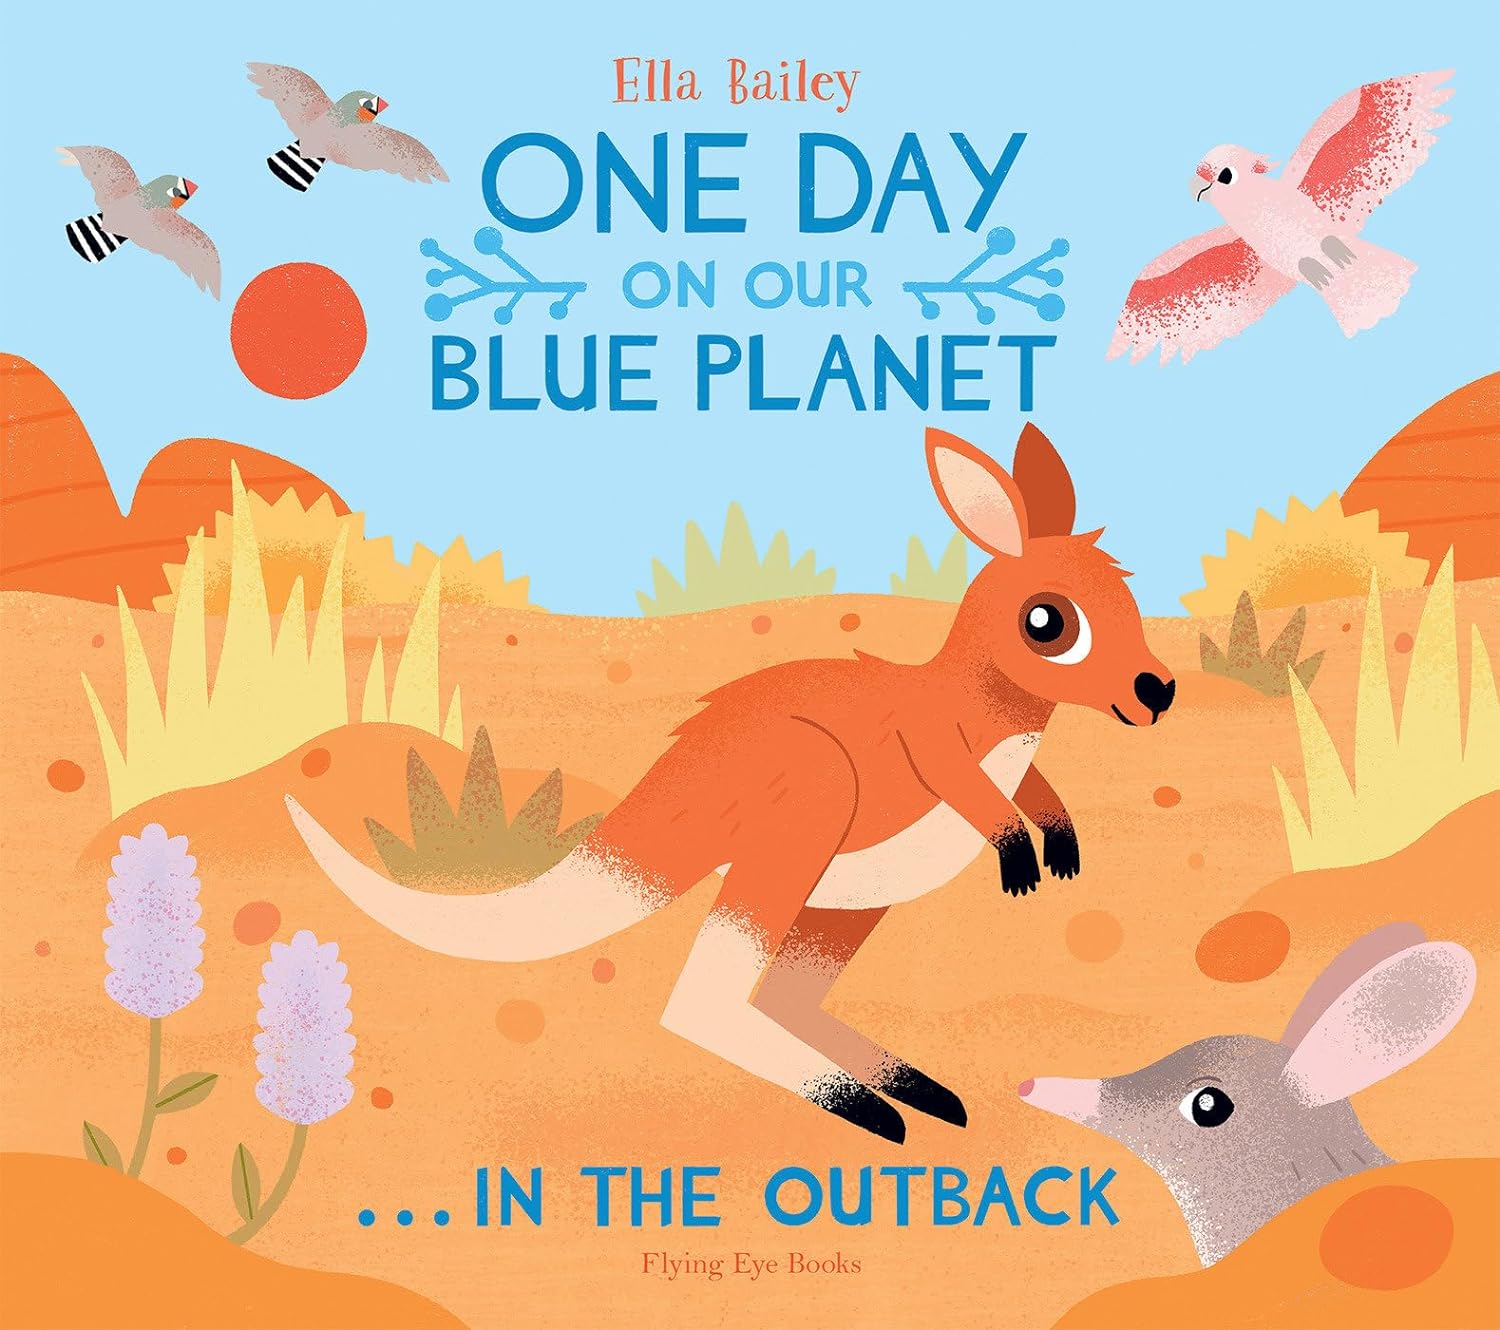 One Day on Our Blue Planet … In the Outback